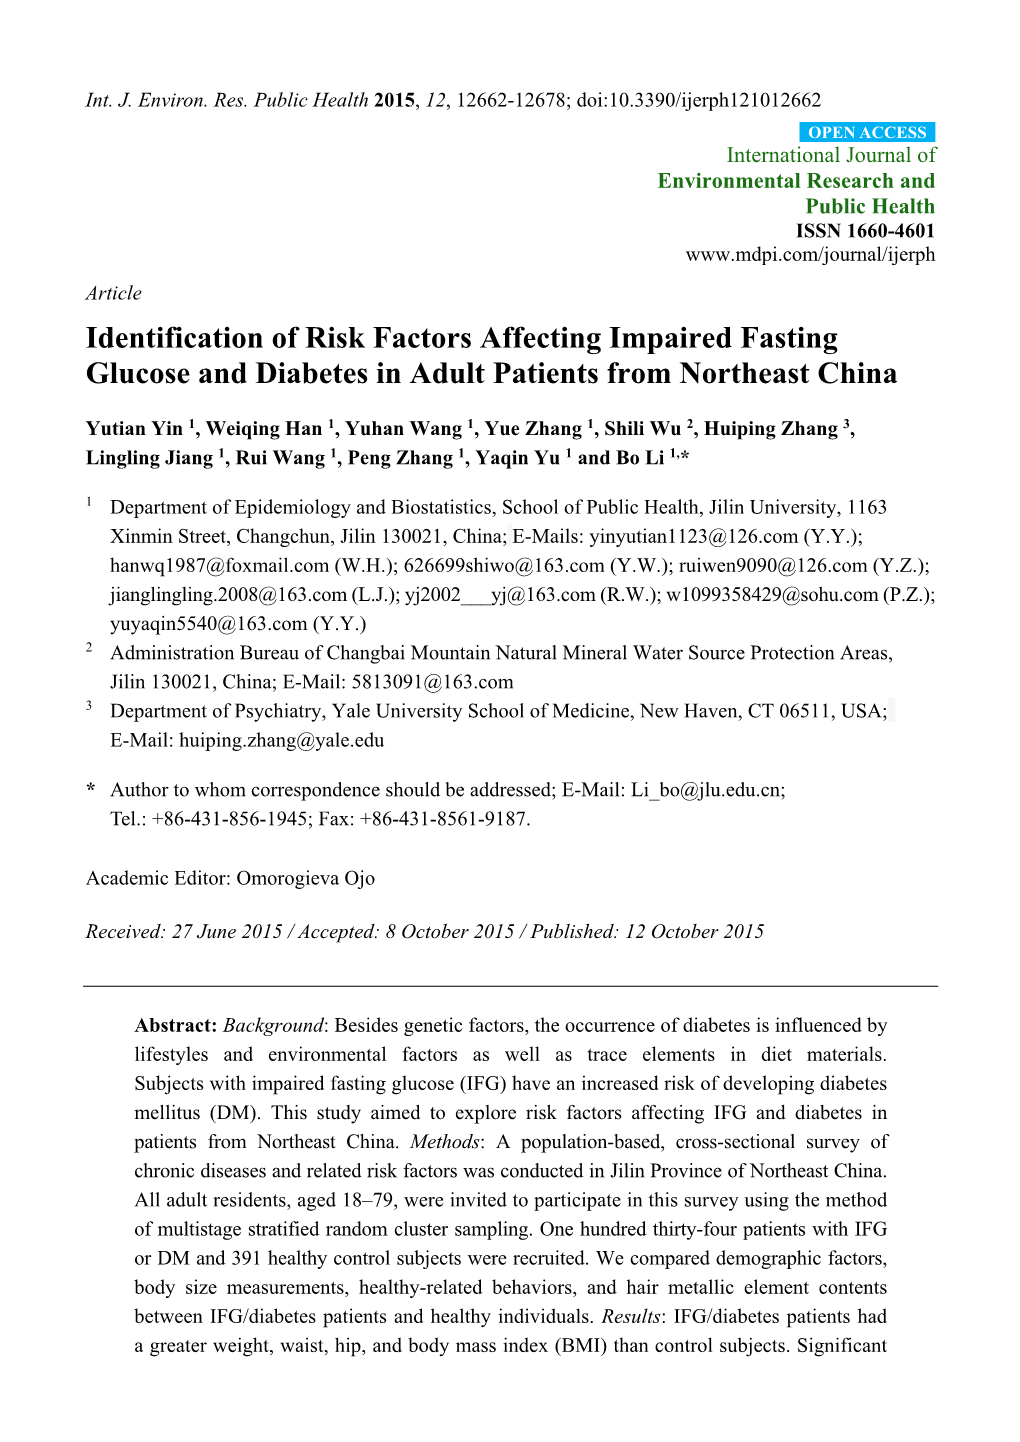 Identification of Risk Factors Affecting Impaired Fasting Glucose and Diabetes in Adult Patients from Northeast China